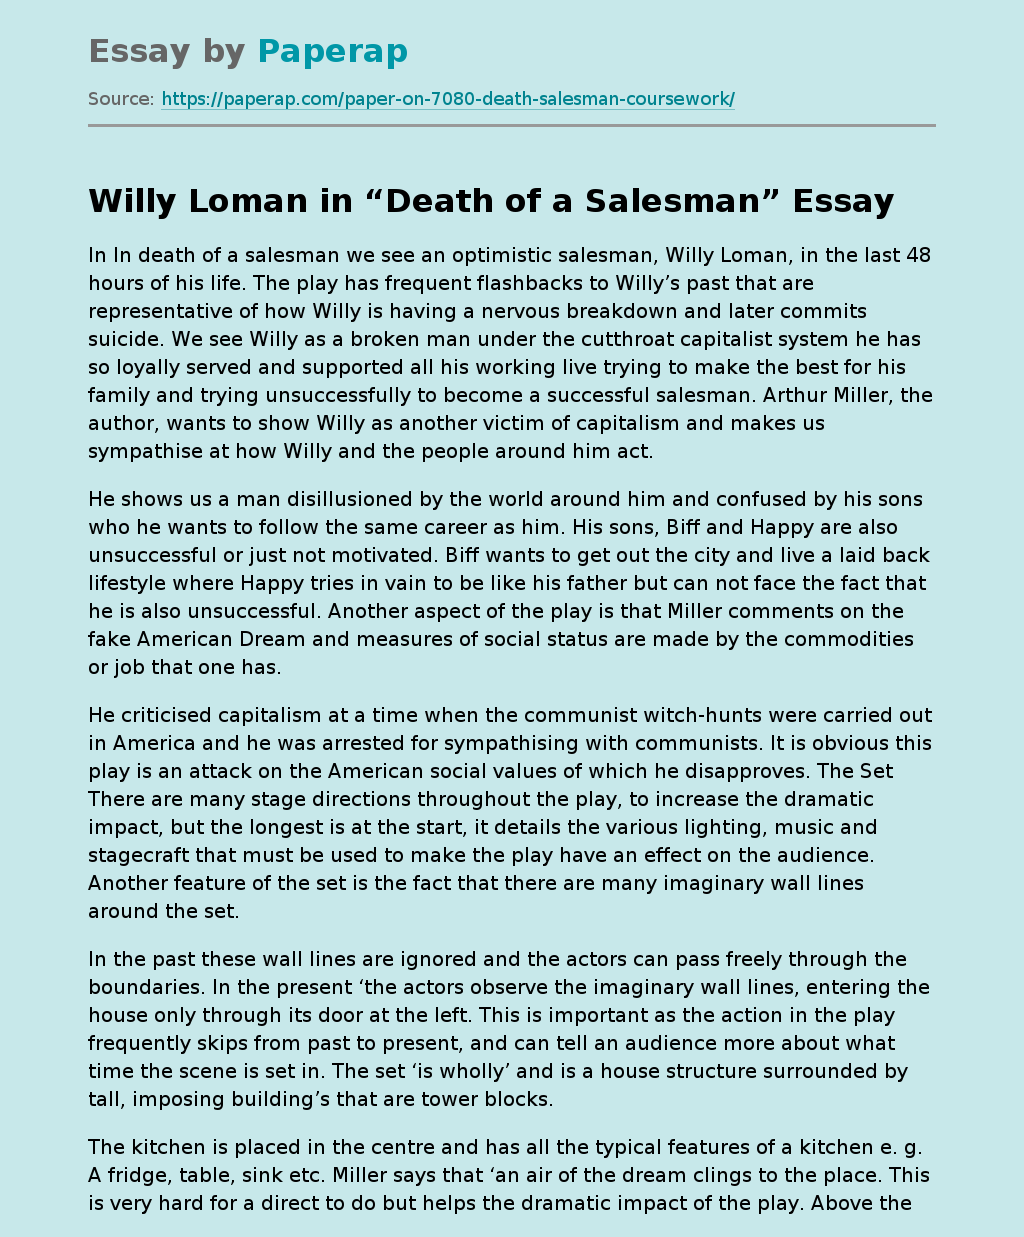 Willy Loman in “Death of a Salesman”